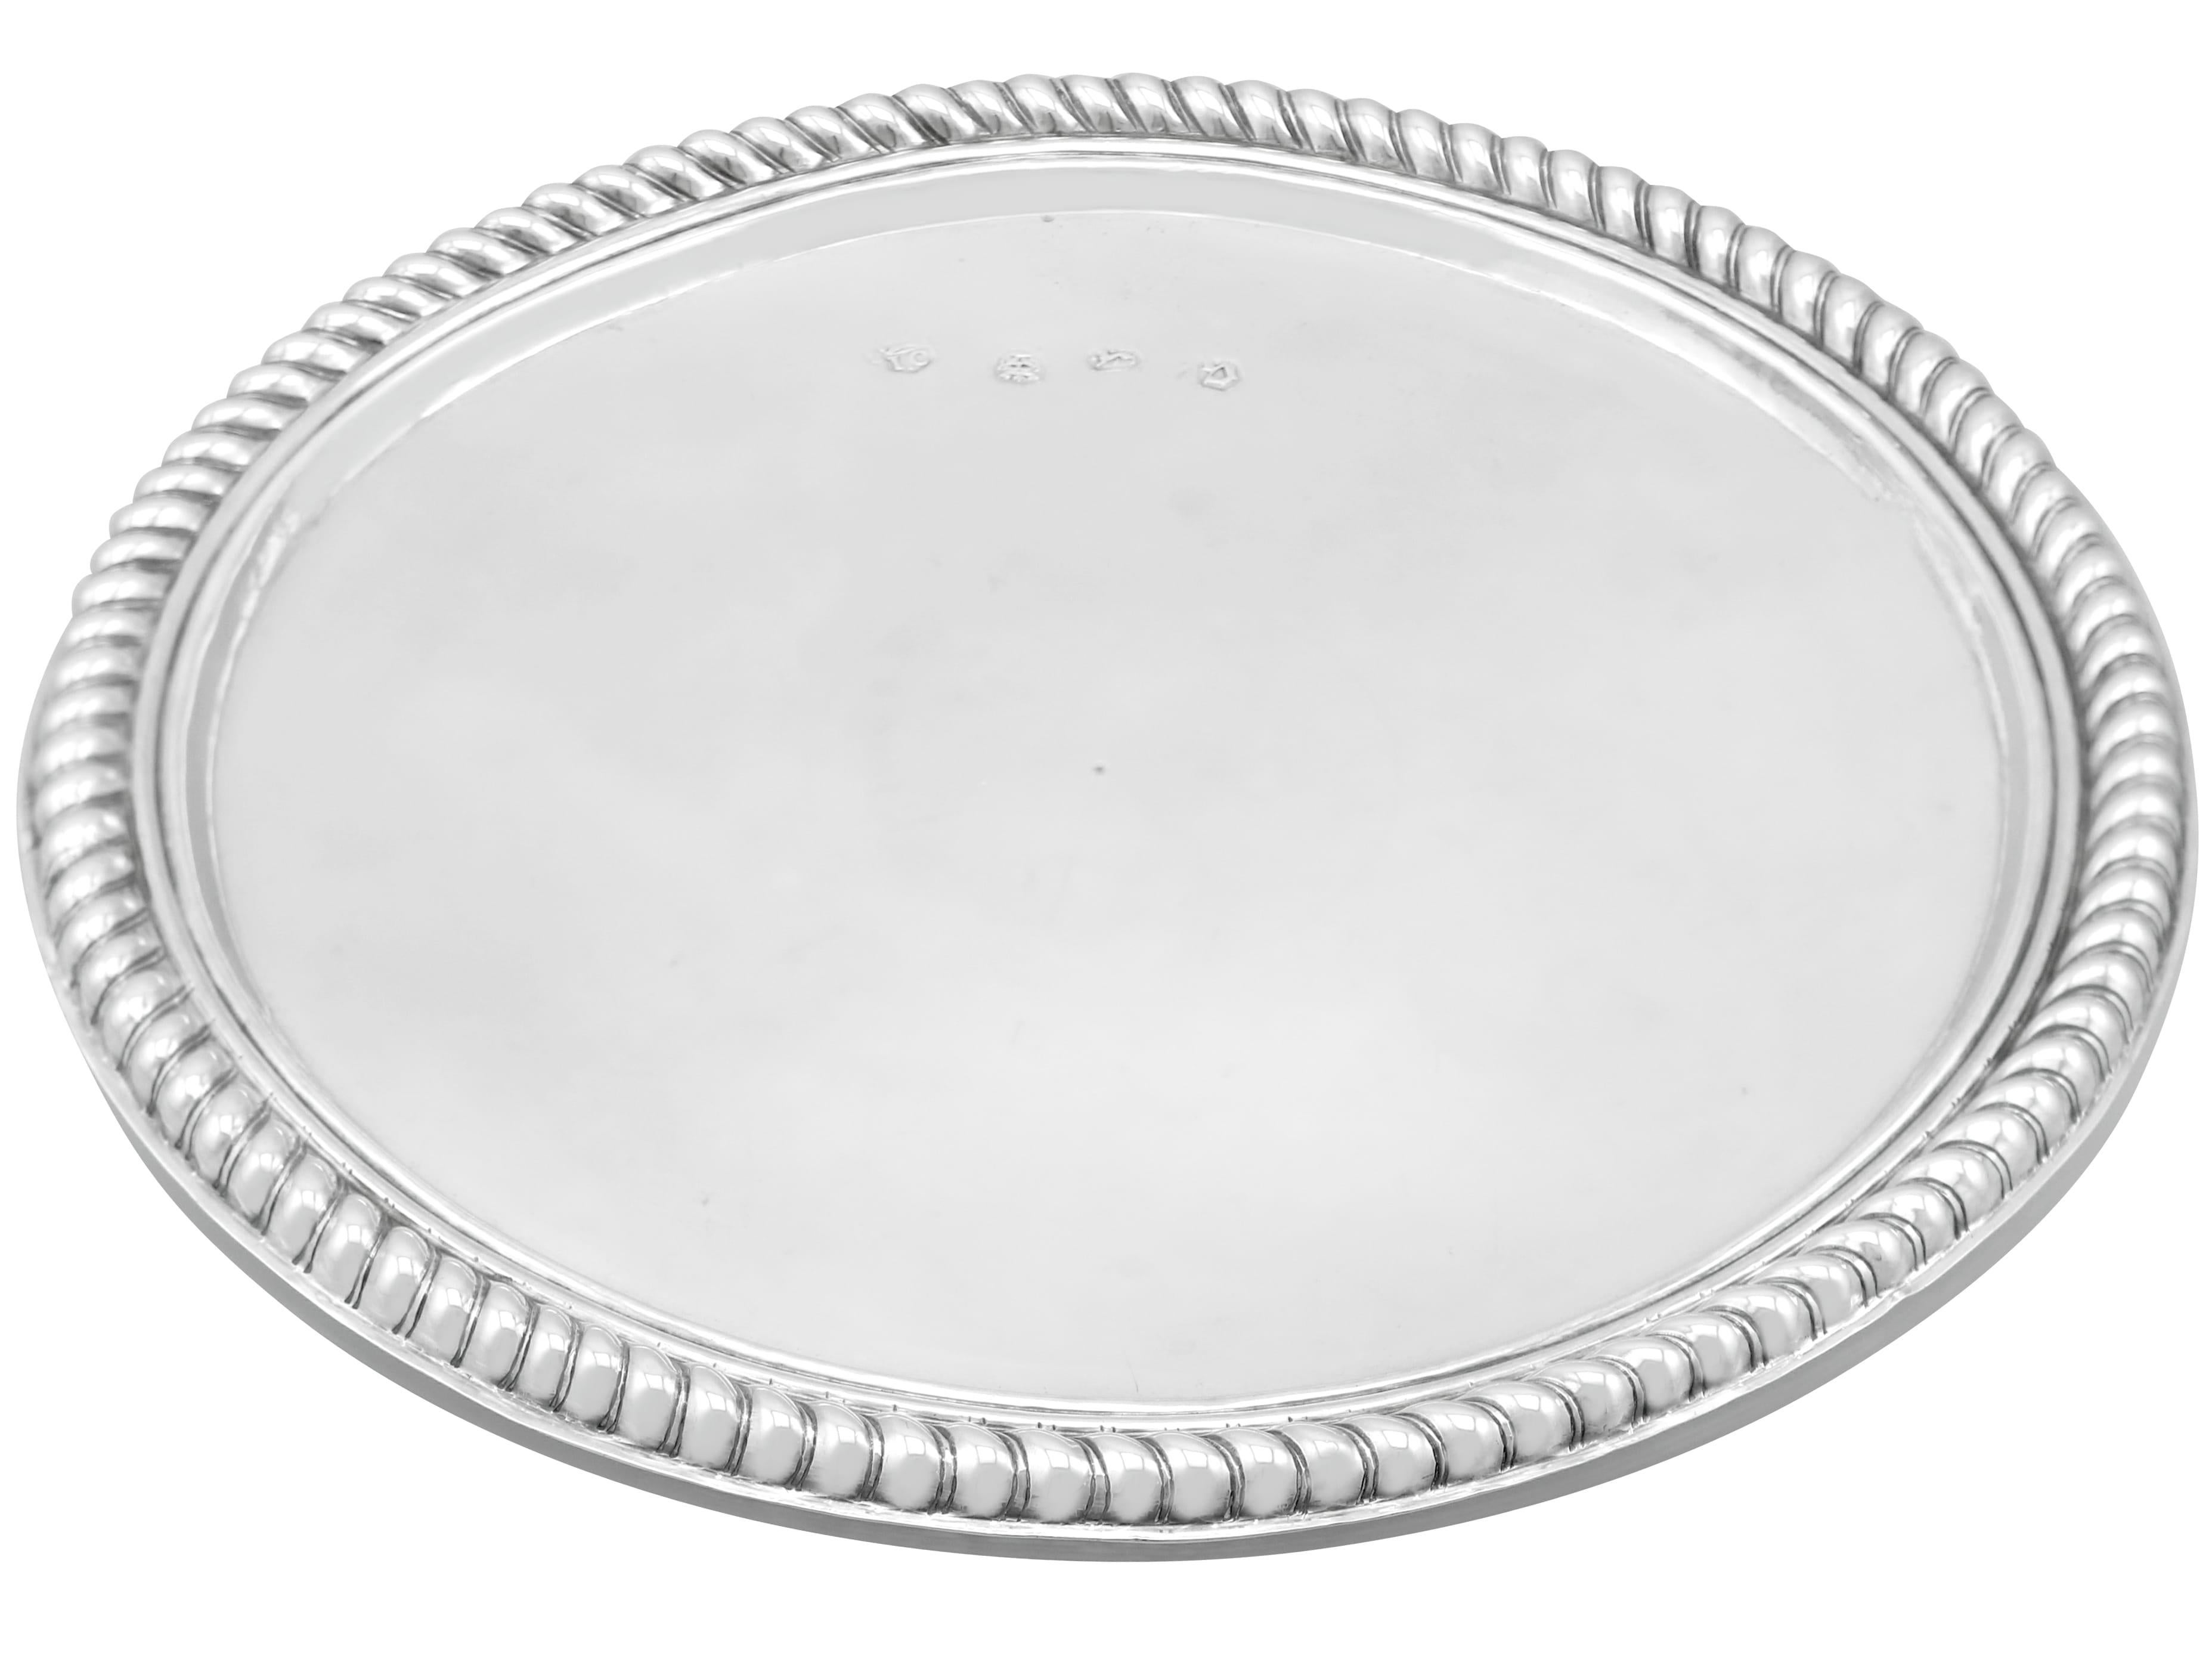 An exceptional, fine and impressive antique William III English sterling silver tazza; part of our dining silverware collection

This exceptional antique William III English sterling silver tazza has a plain circular form onto a cylindrical